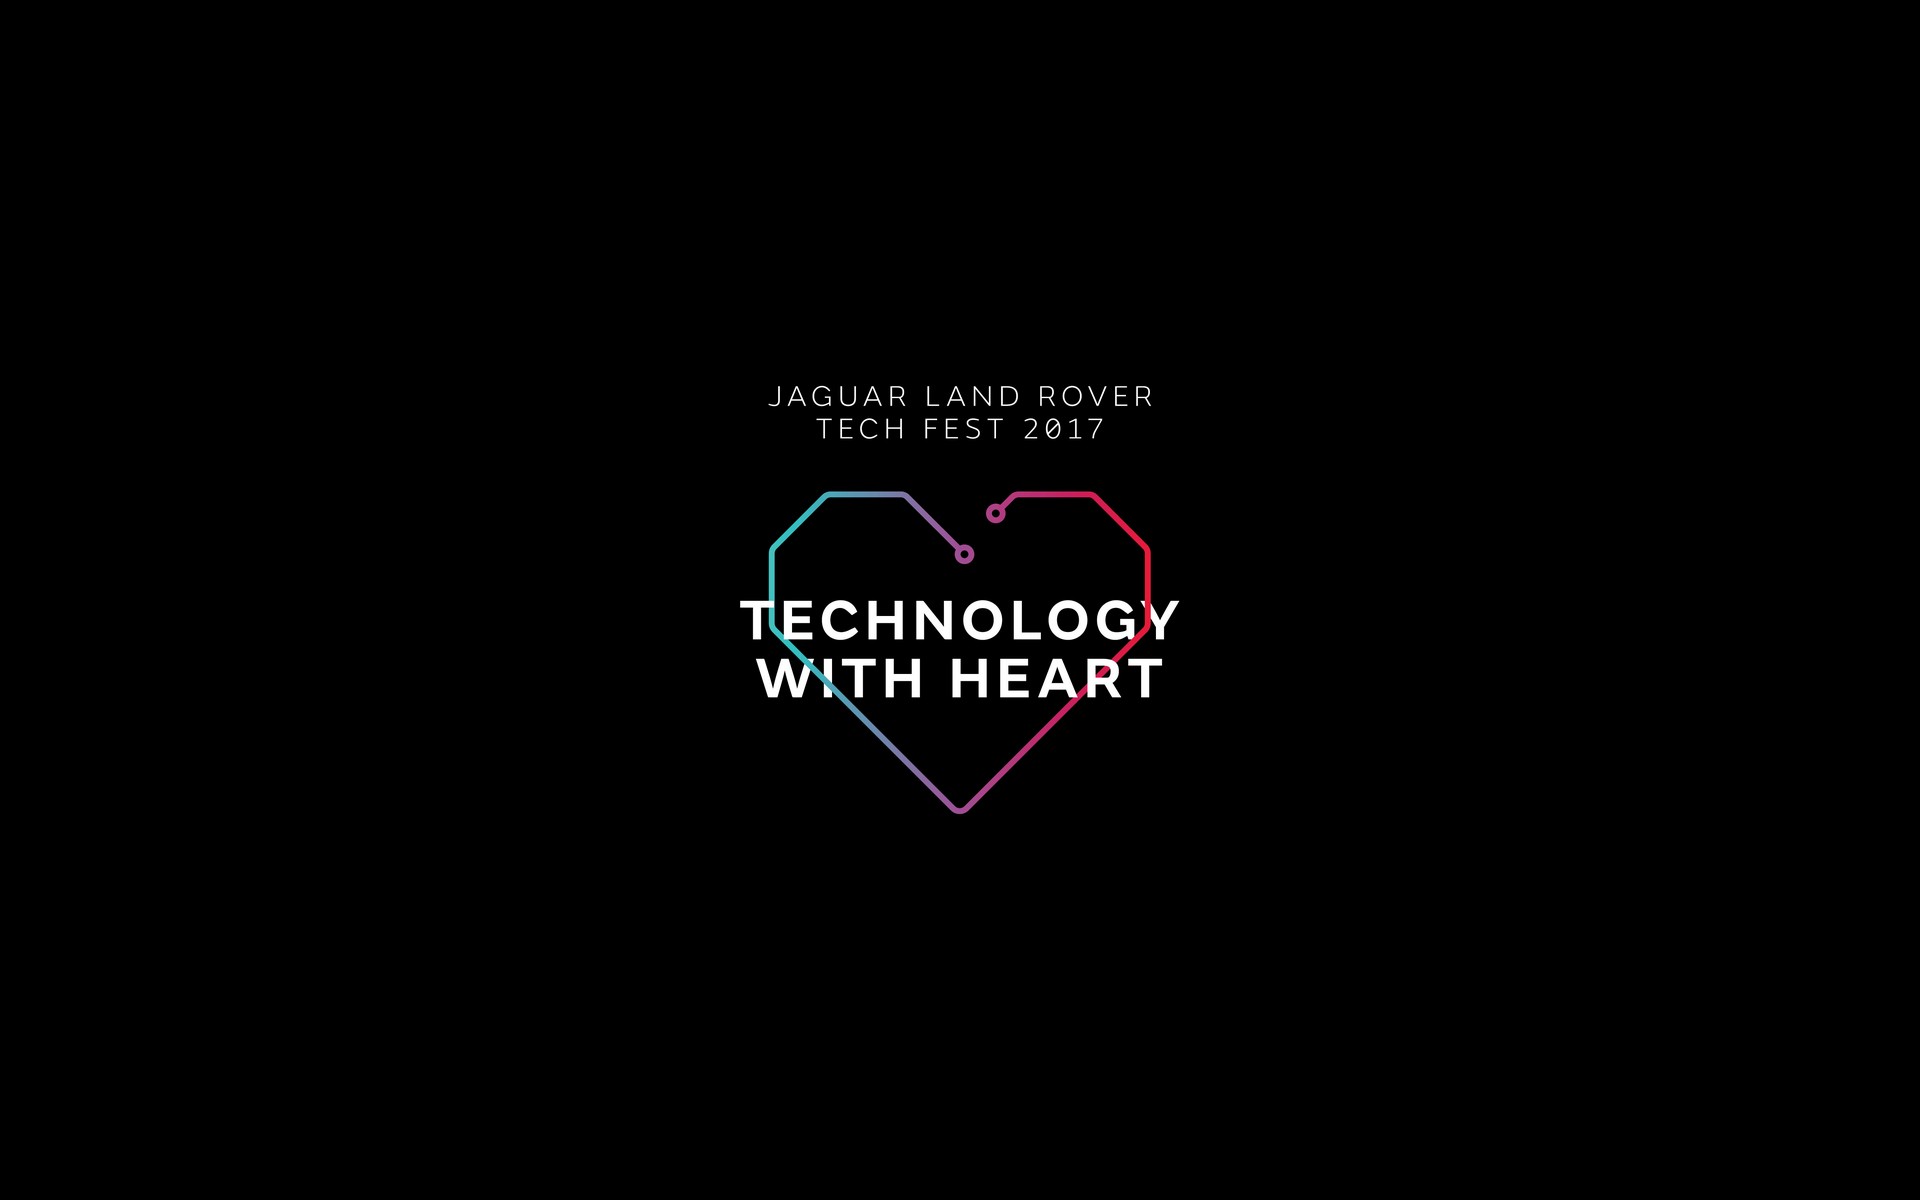 Technology with heart